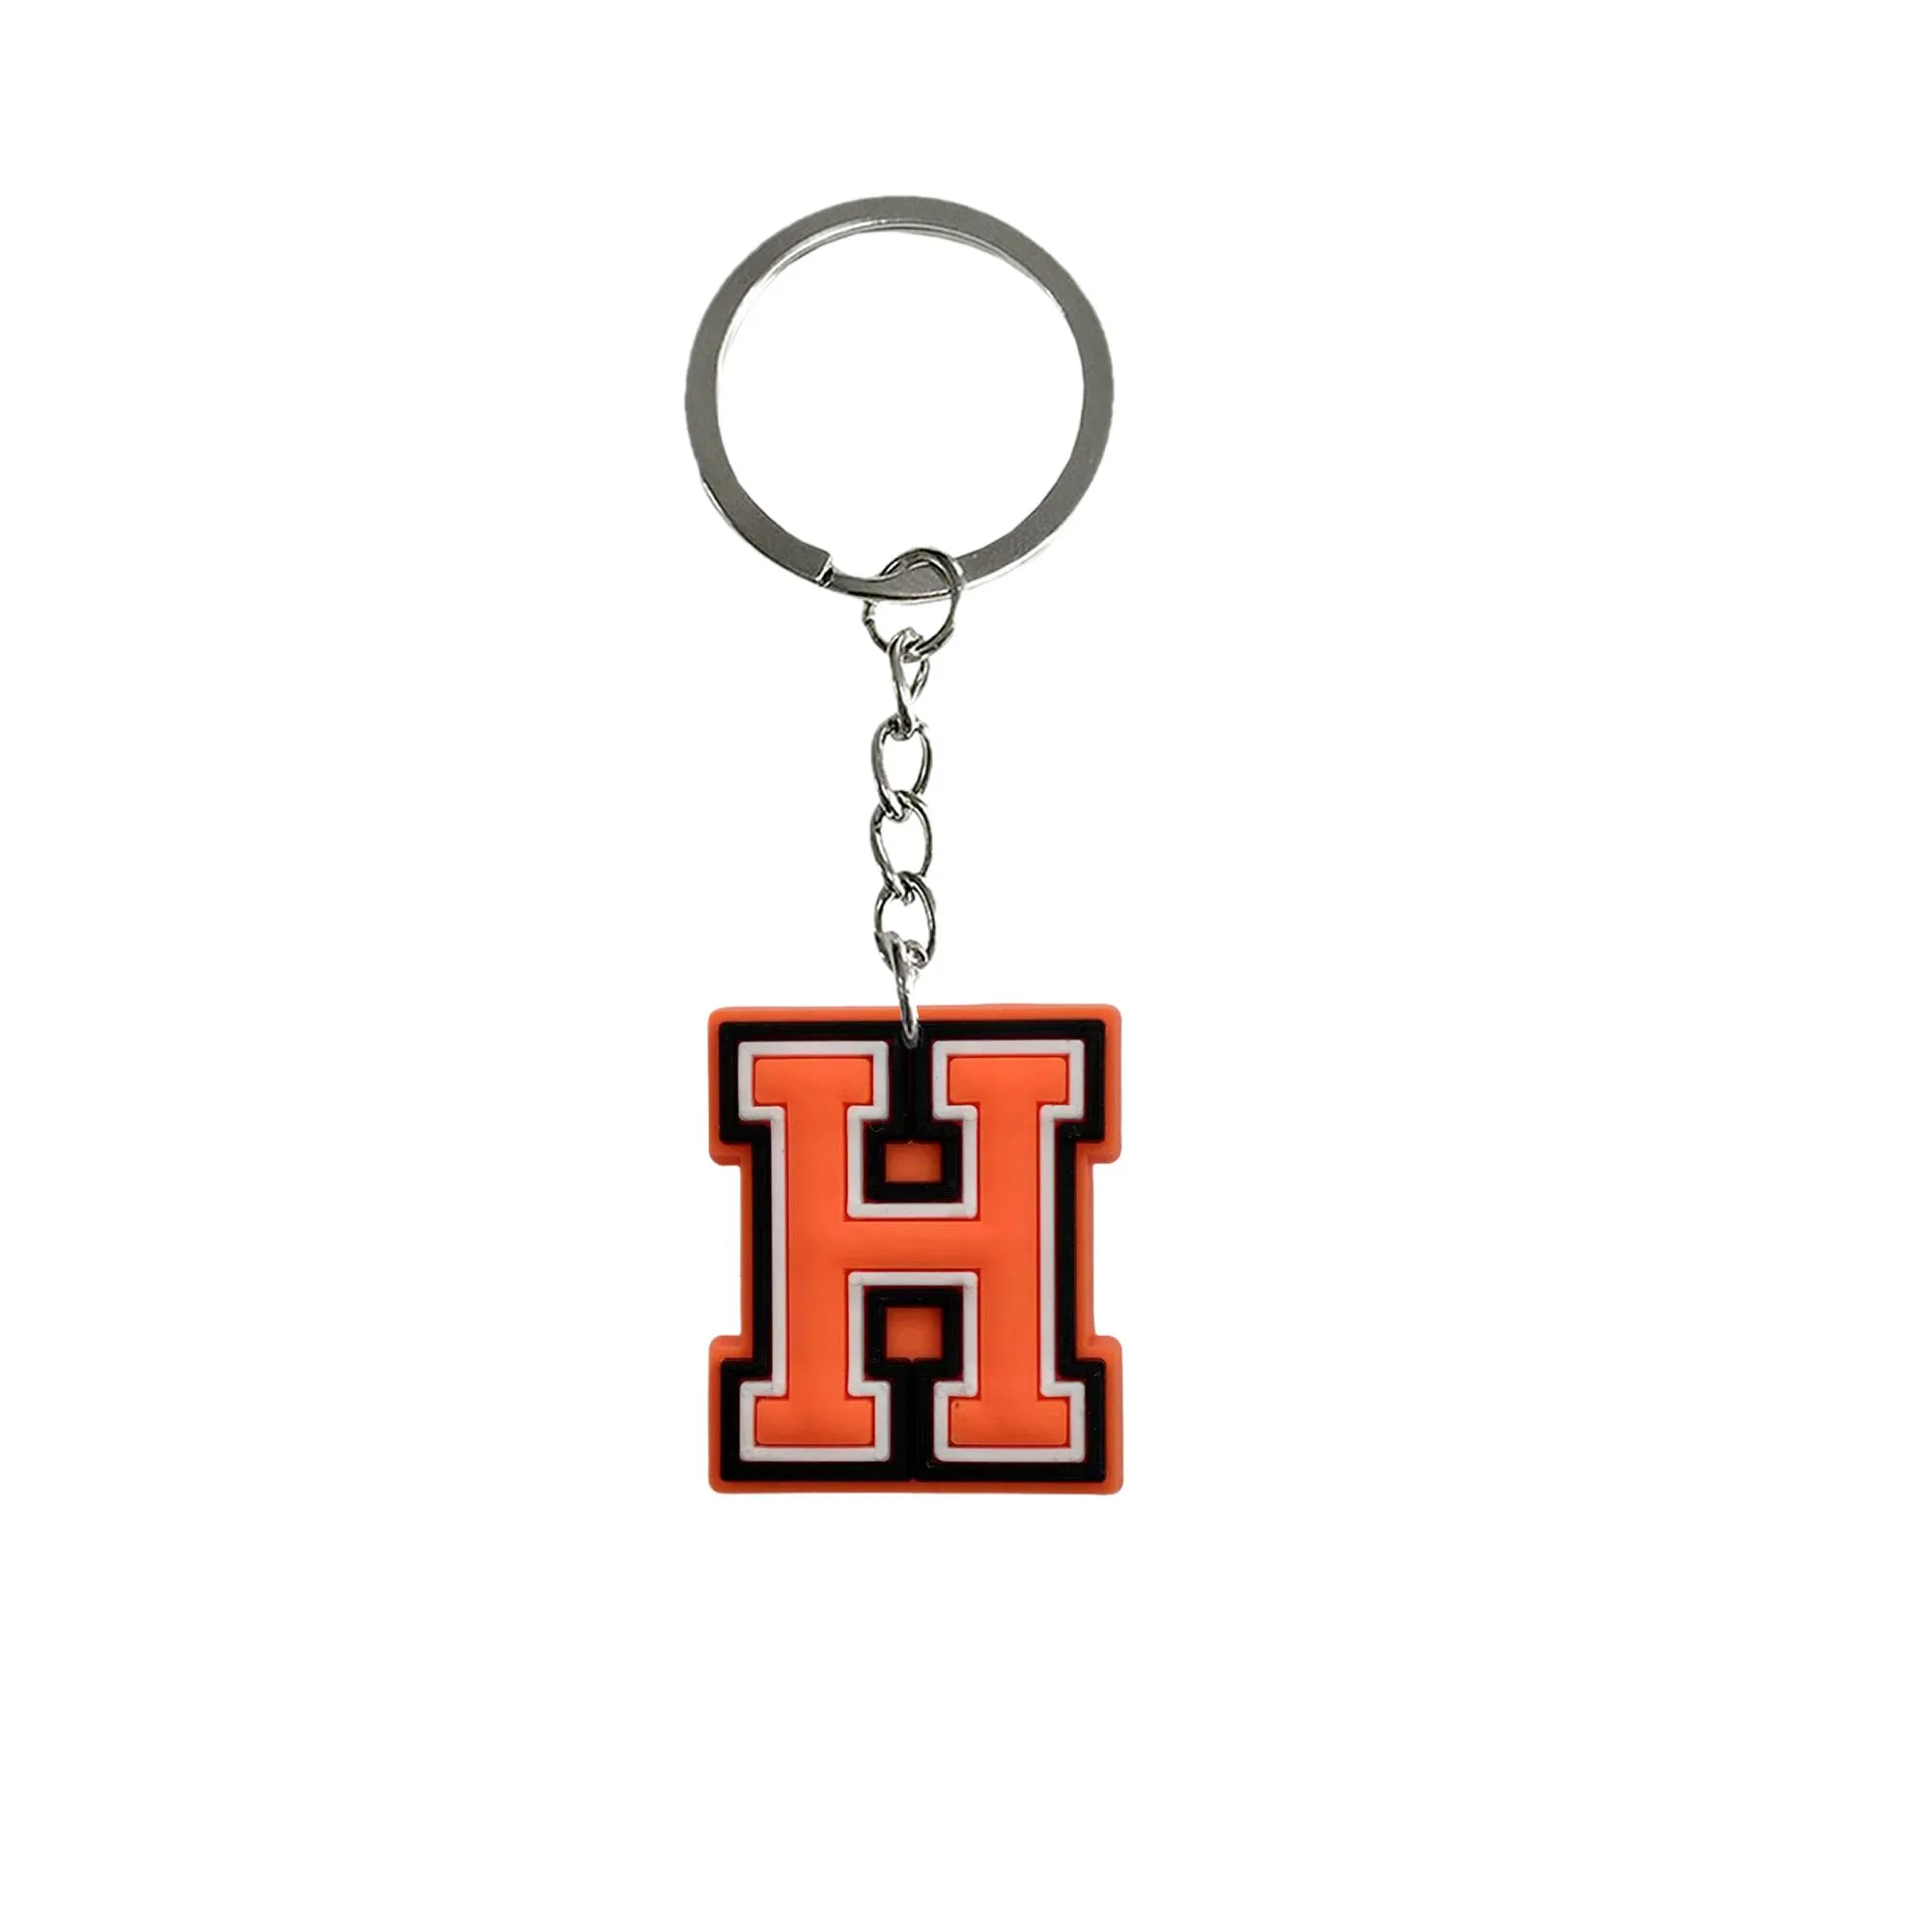 Charms Orange Letter 26 Keychain For Classroom Prizes Keychains Backpack Party Favors Keyring Suitable Schoolbag Key Pendant Accessori Otfuw